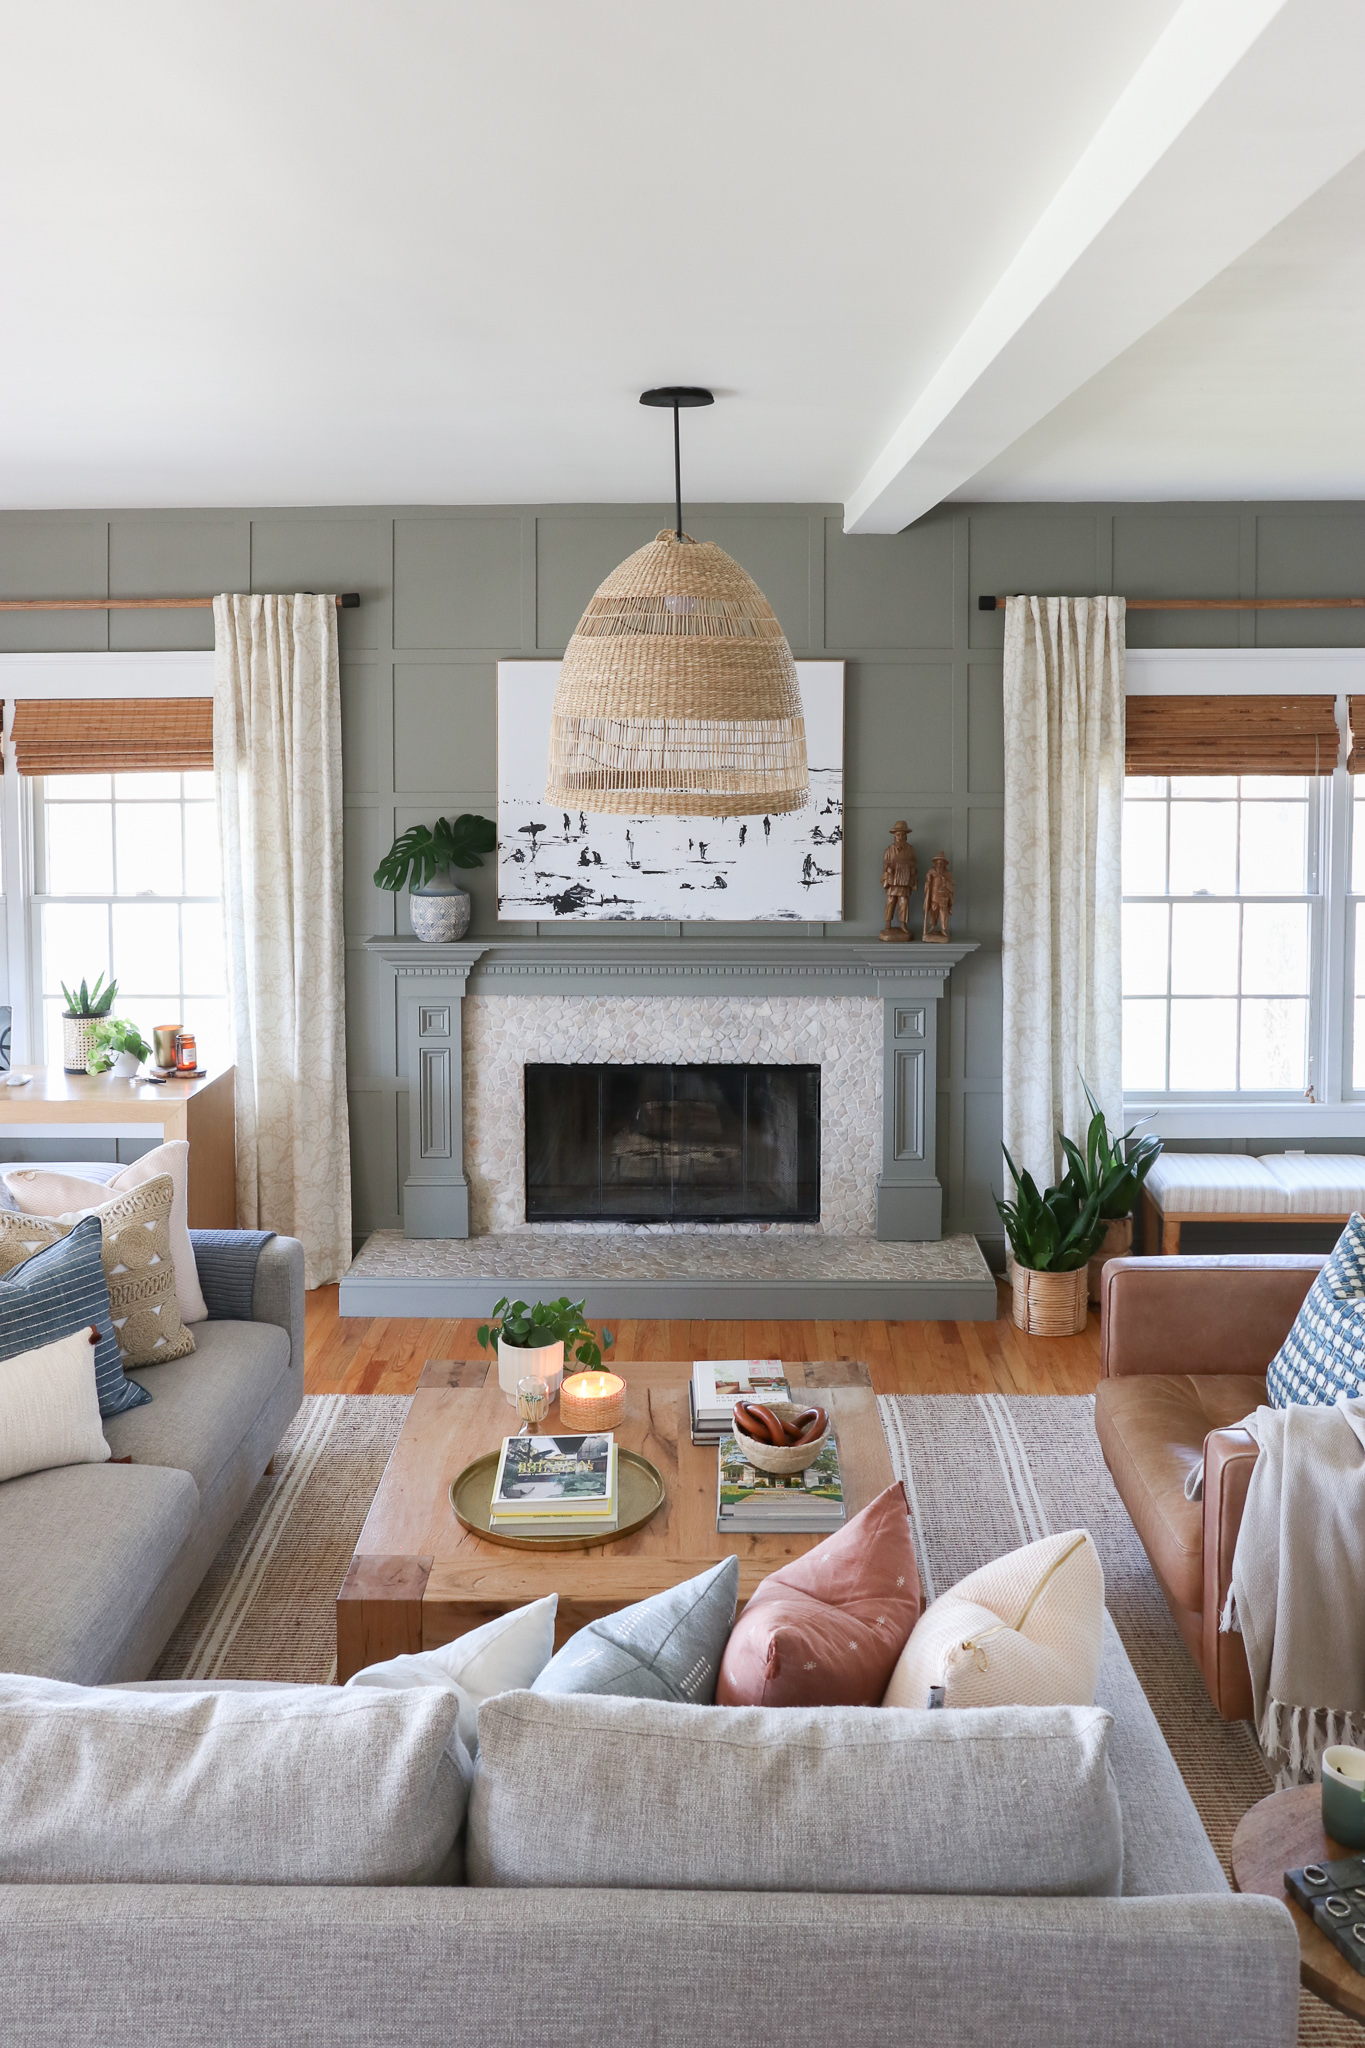 Family Room Reveal-Bridgerton Meets the Long Island Coast. Rug Malta/Natural by Annie Selke. Antionette drapes and pillows by Annie Selke. Paint is Desert Twilight Benjamin Moore.